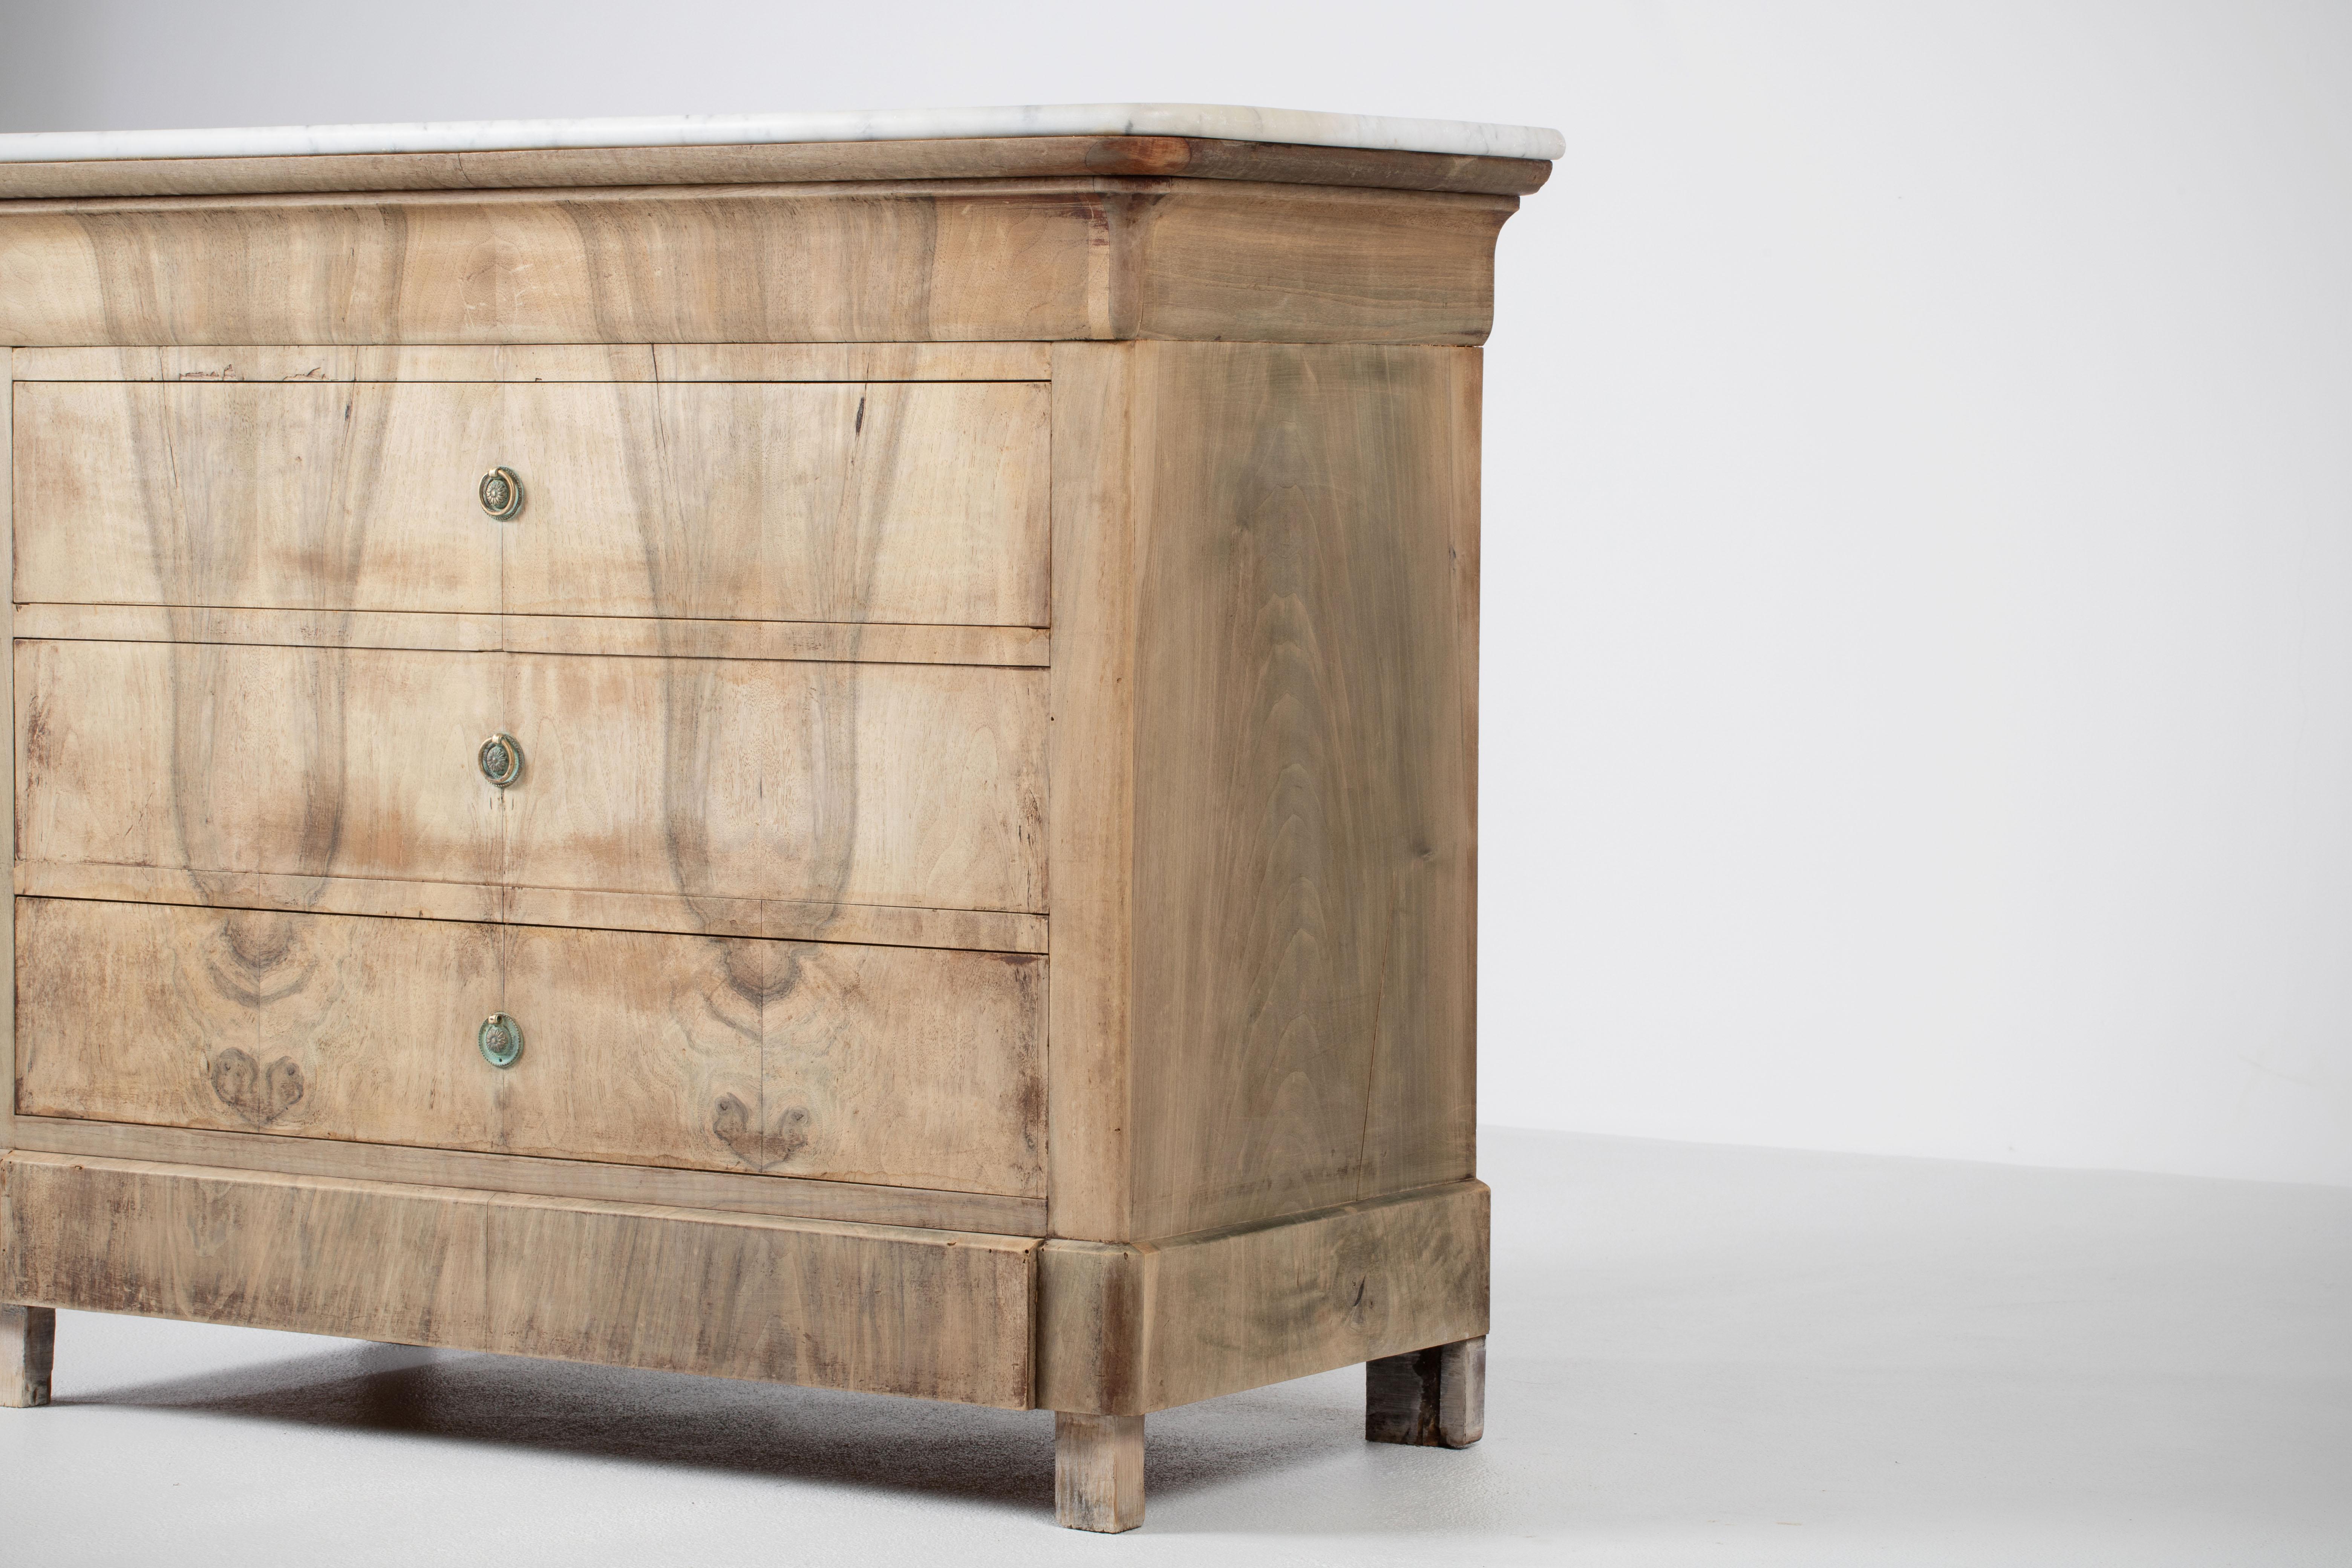 Beautiful French Louis Philippe chest from the 19th century.
Losses and traces of wear, a piece steeped in history and full of charm.